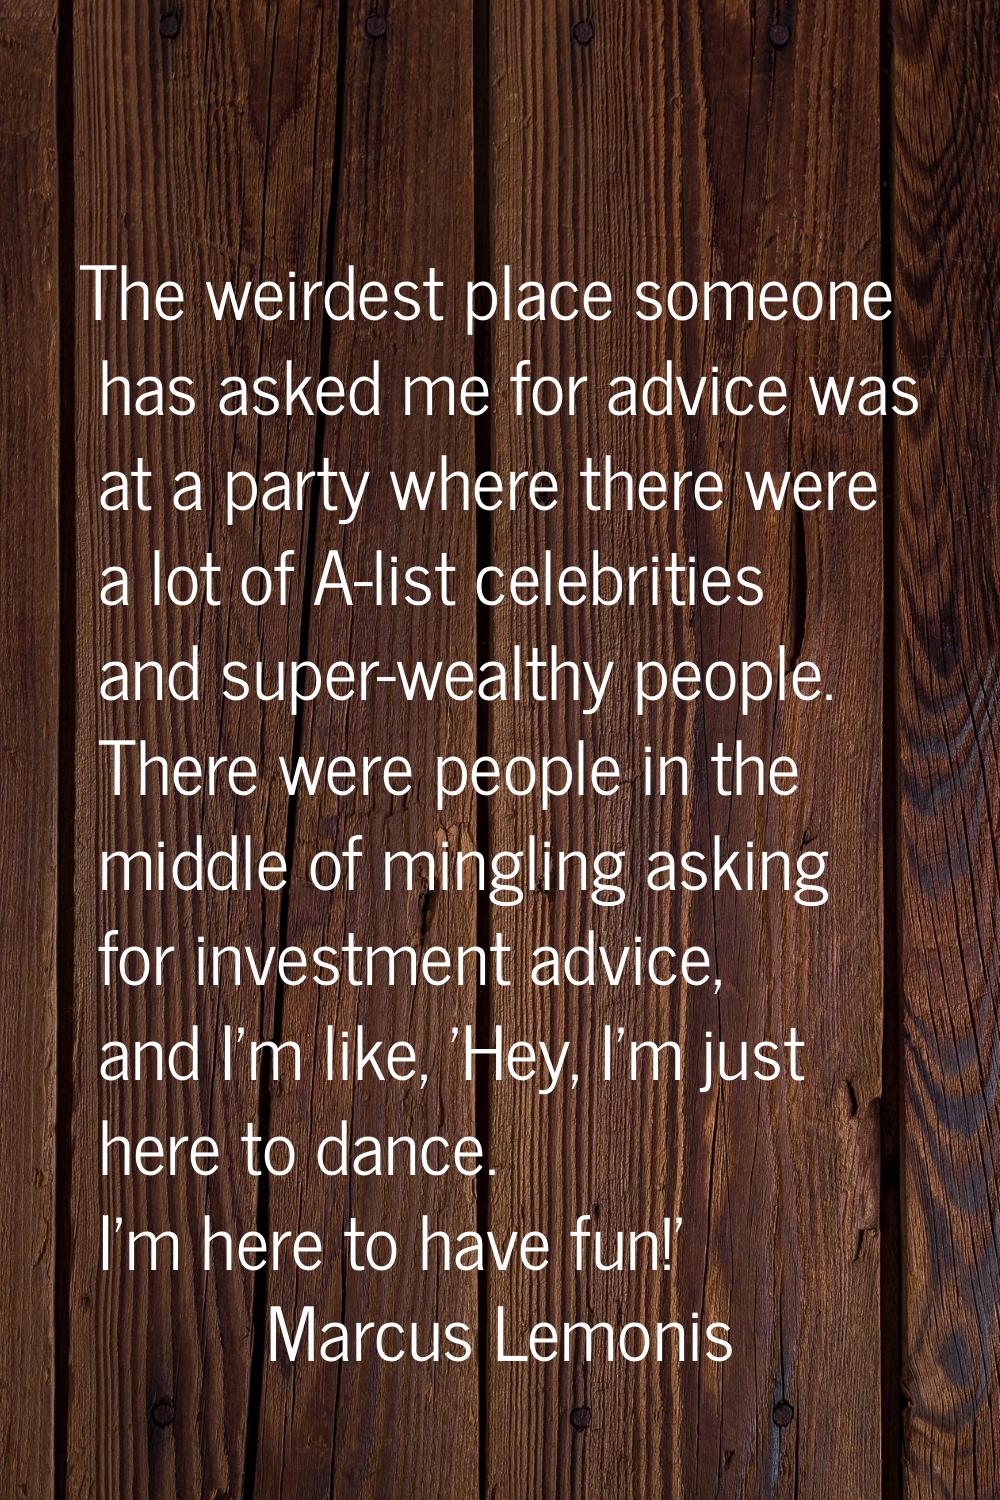 The weirdest place someone has asked me for advice was at a party where there were a lot of A-list 